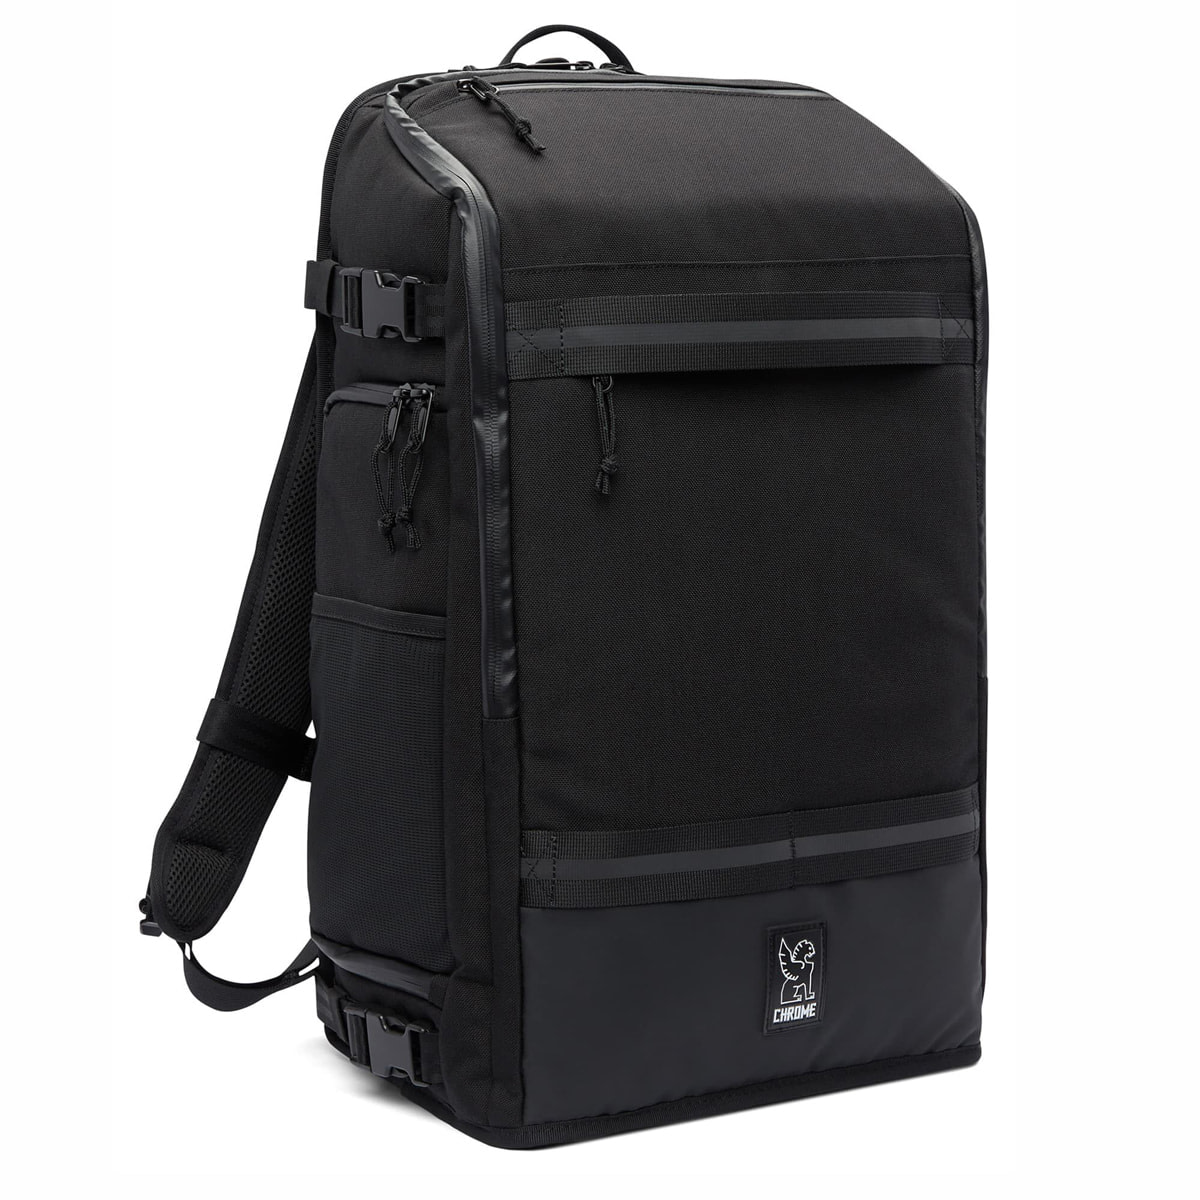 Camera backpack with side access